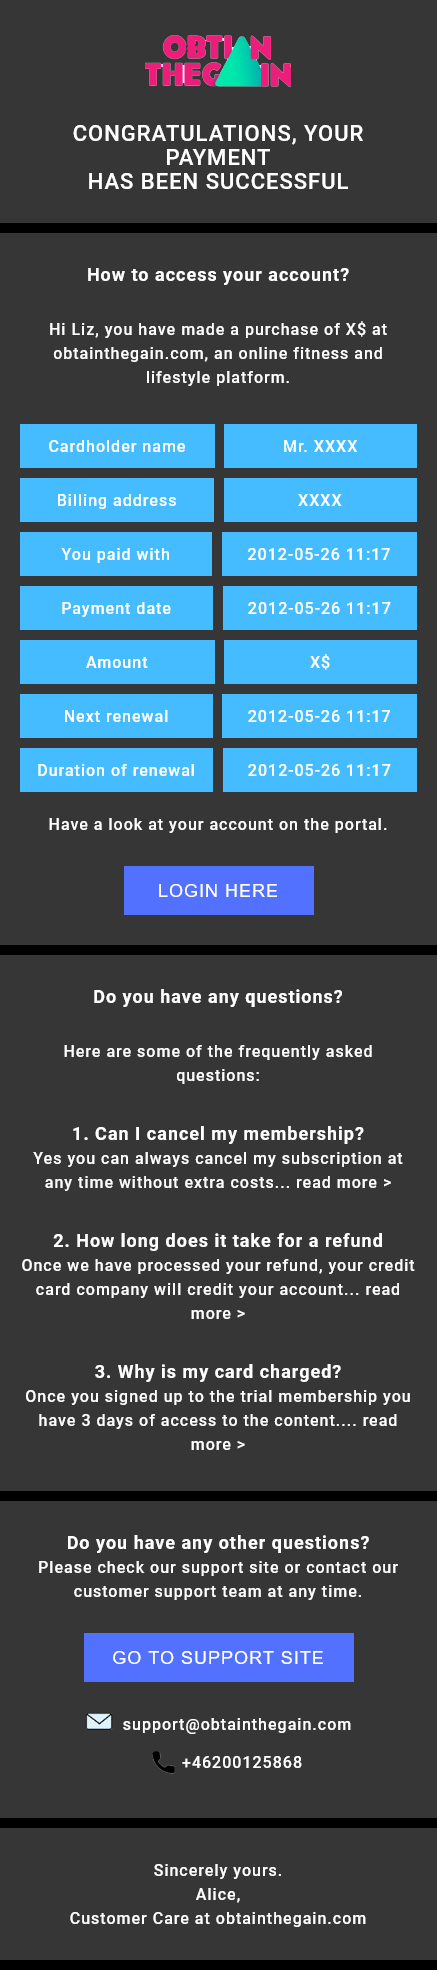 Email Templates Created For Obtain The Gain Transactional Payment Subscription Dark mode on mobile design